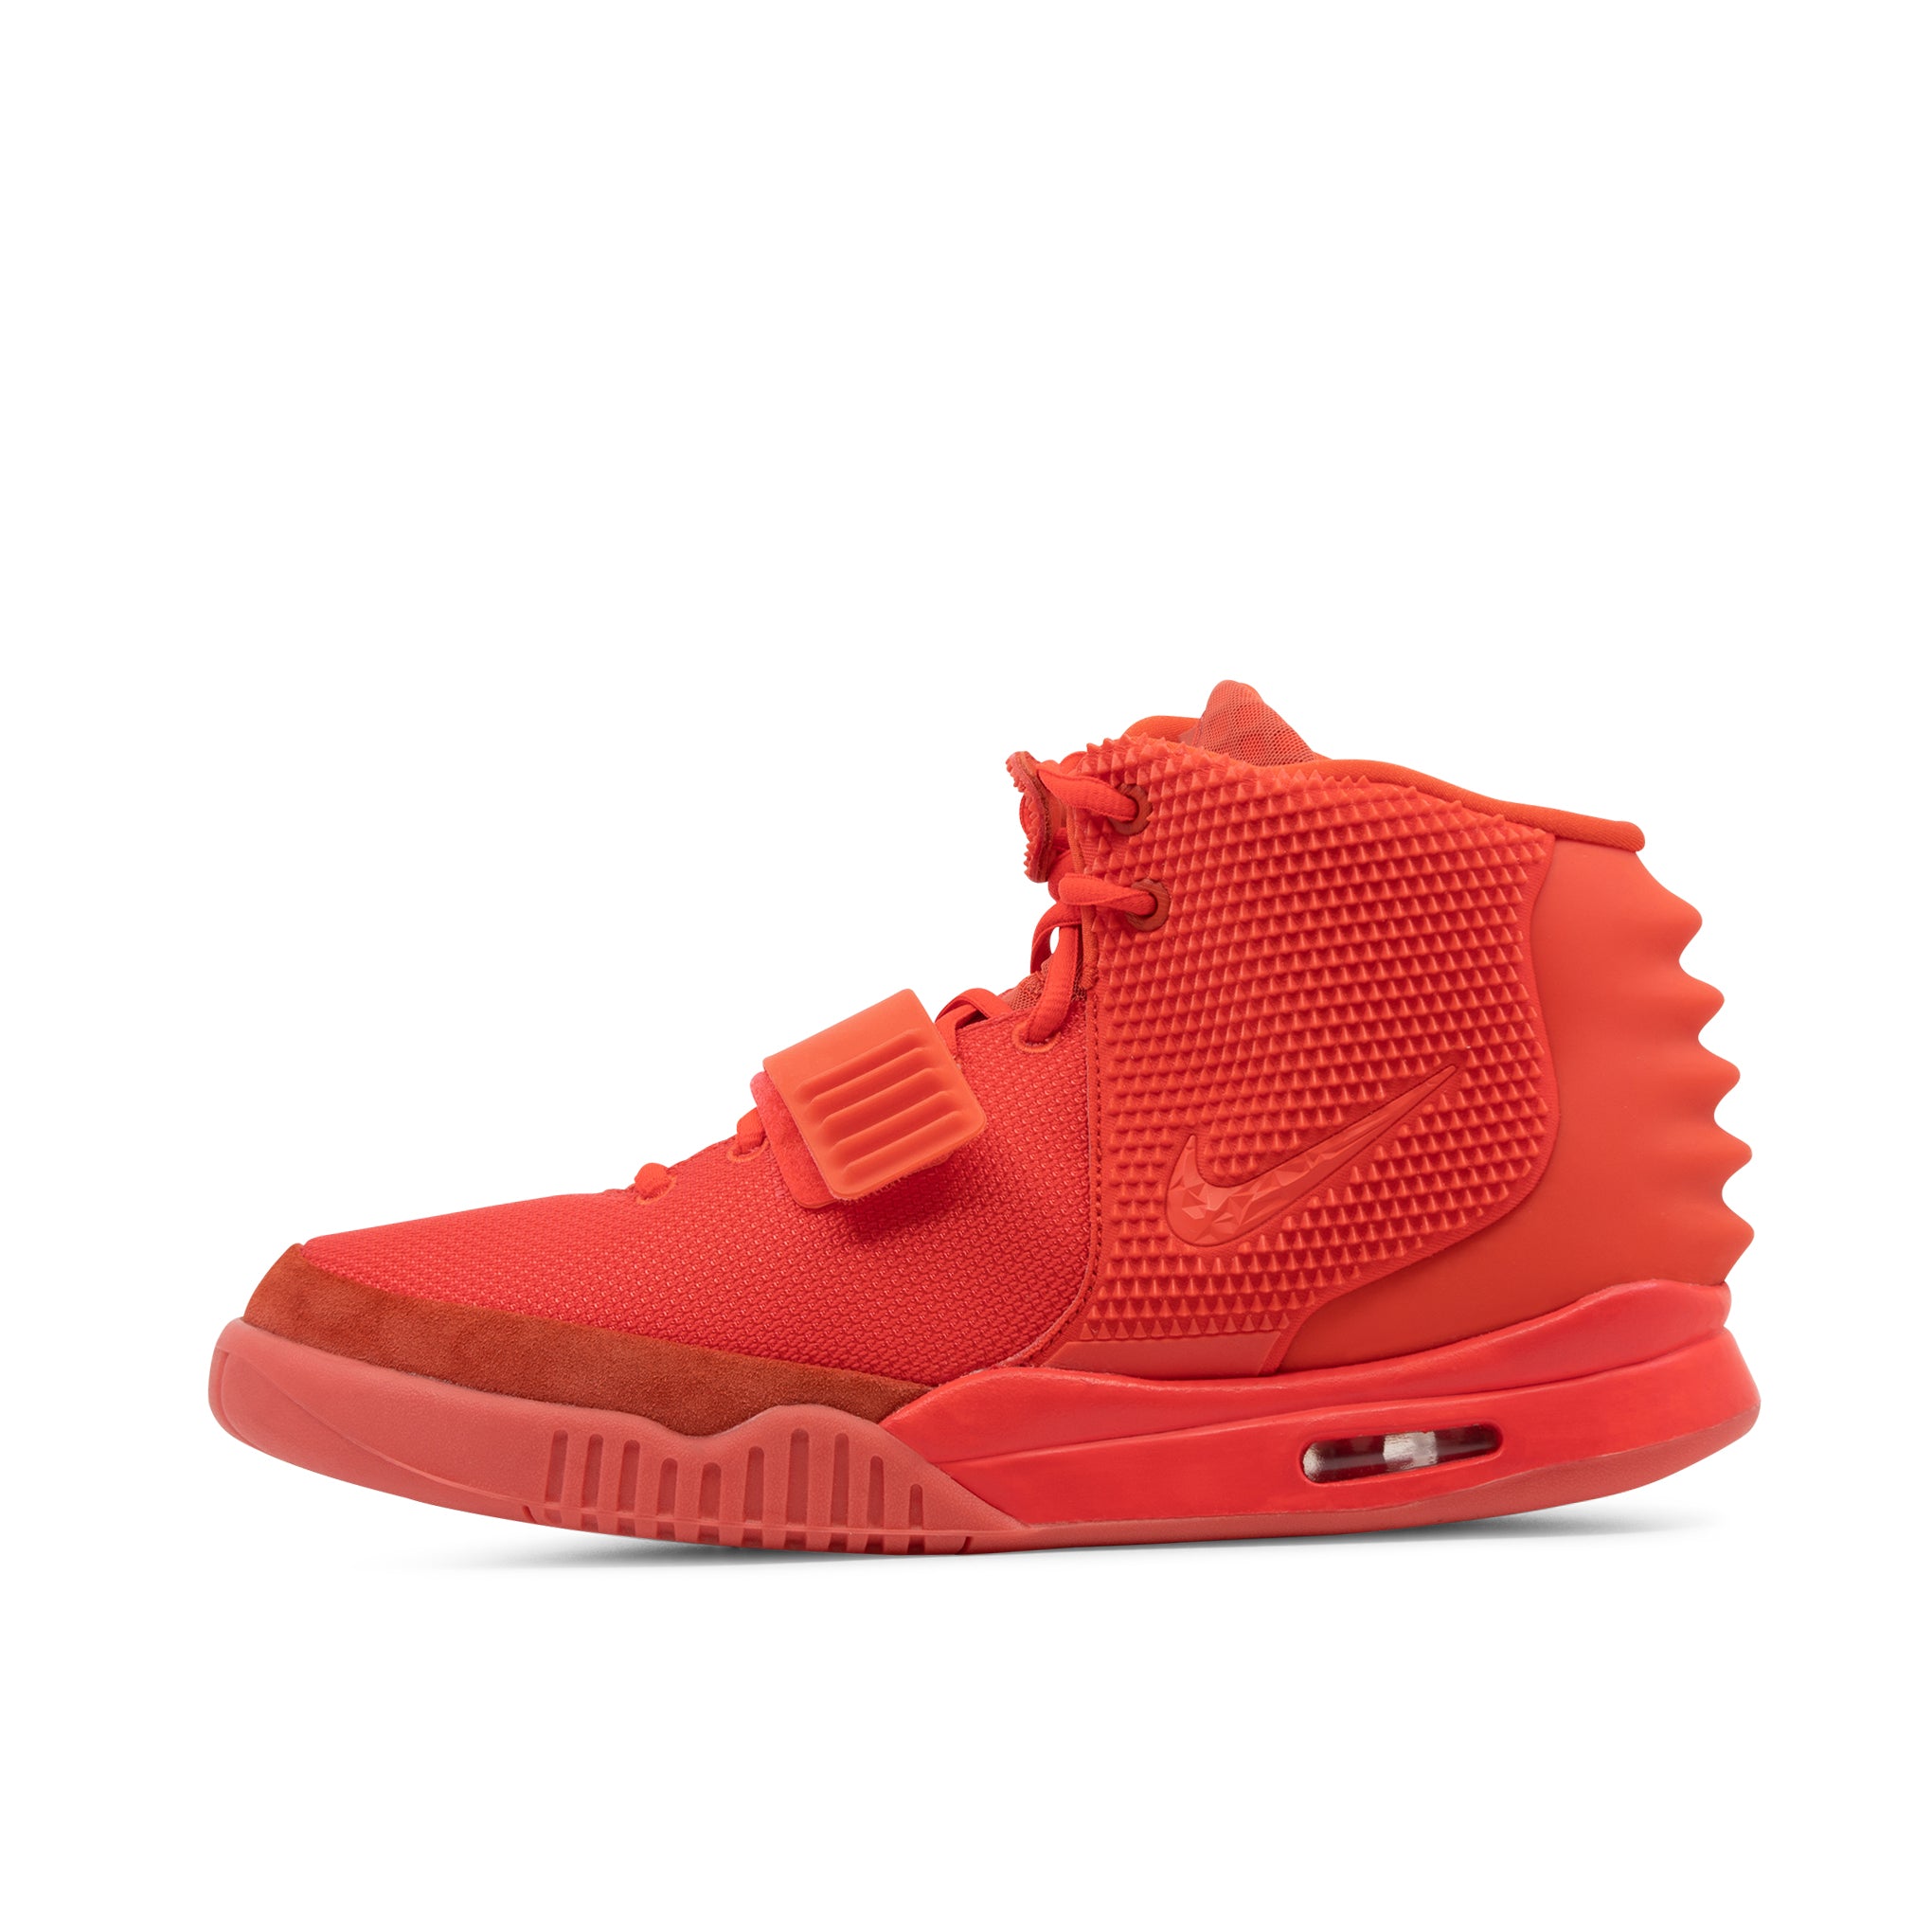 NIKE AIR YEEZY 2 RED OCTOBER